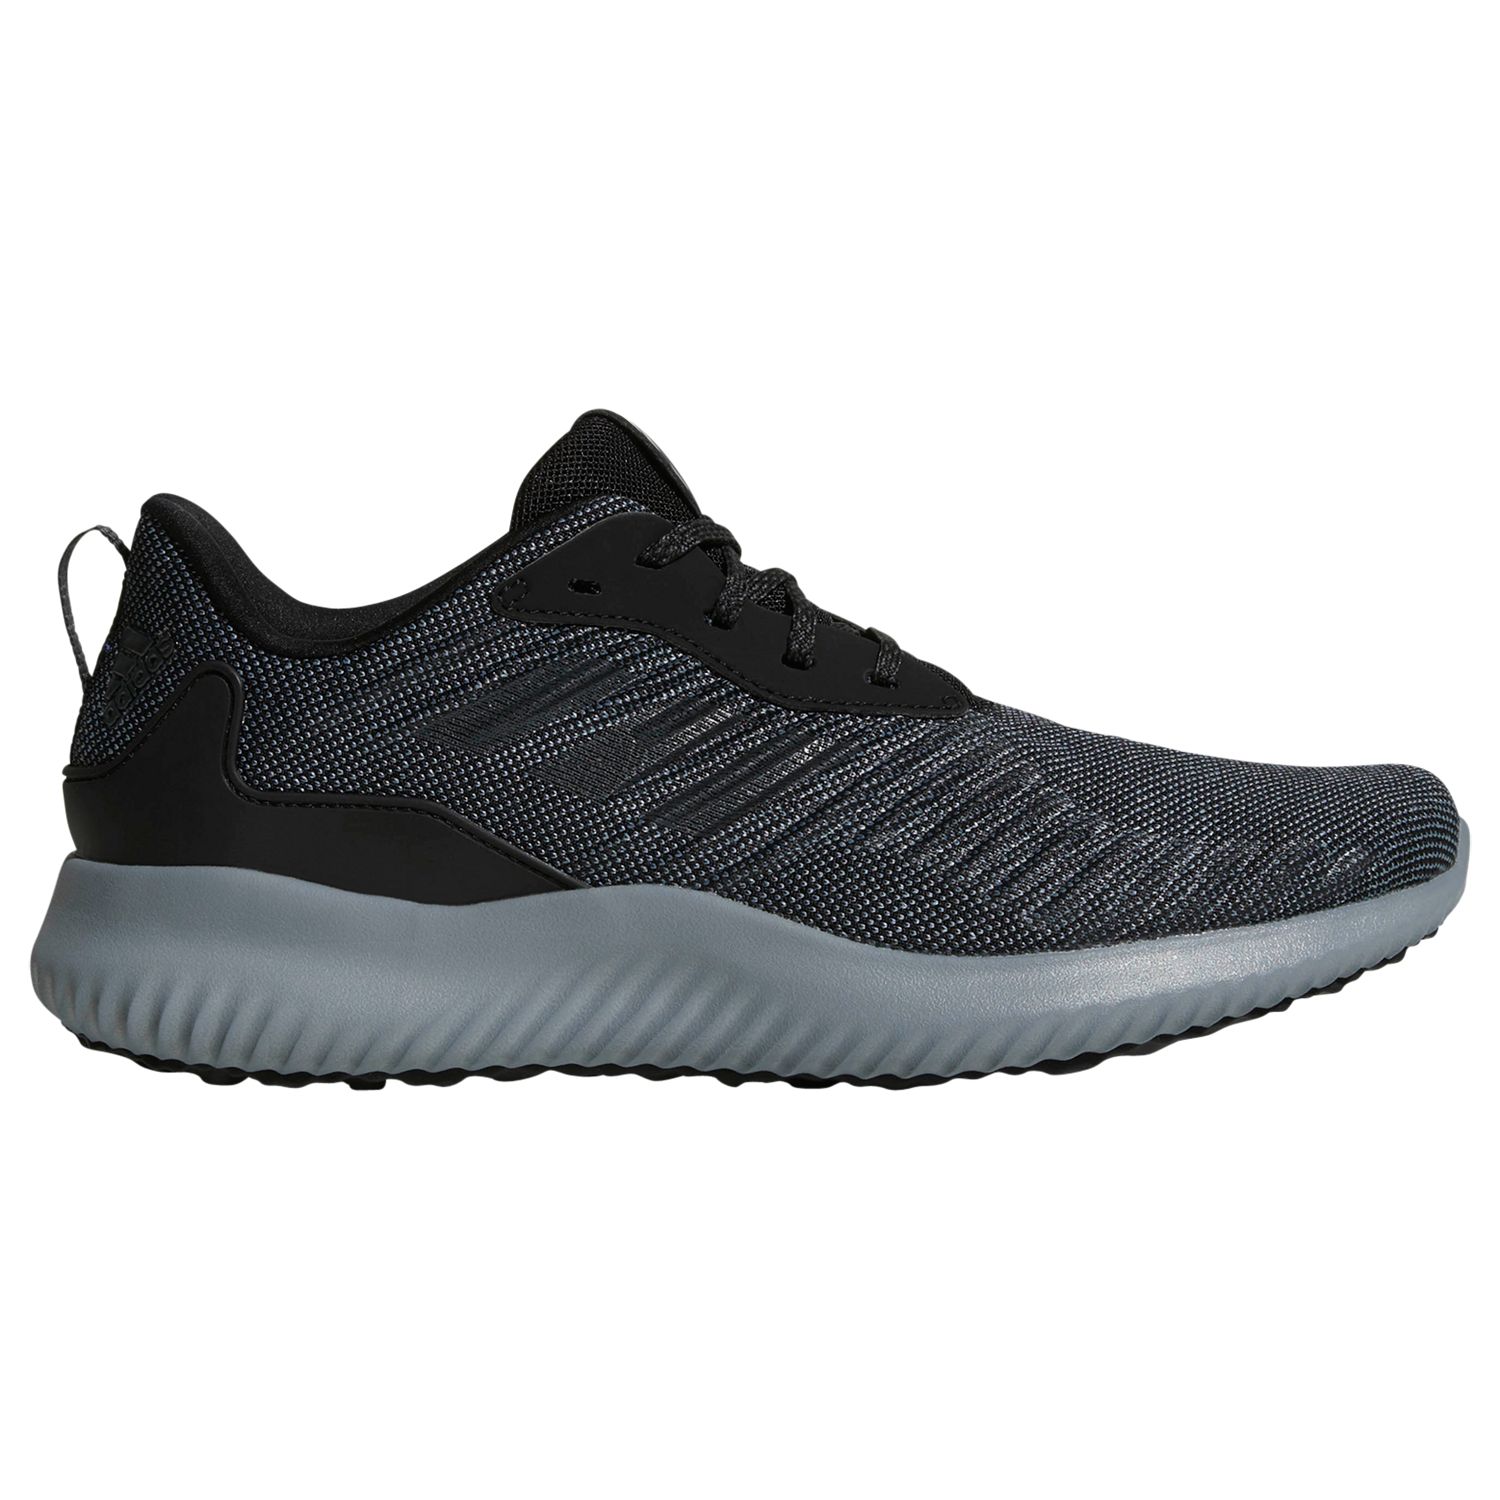 adidas Alphabounce RC Men's Running Shoes, Black, 8.5